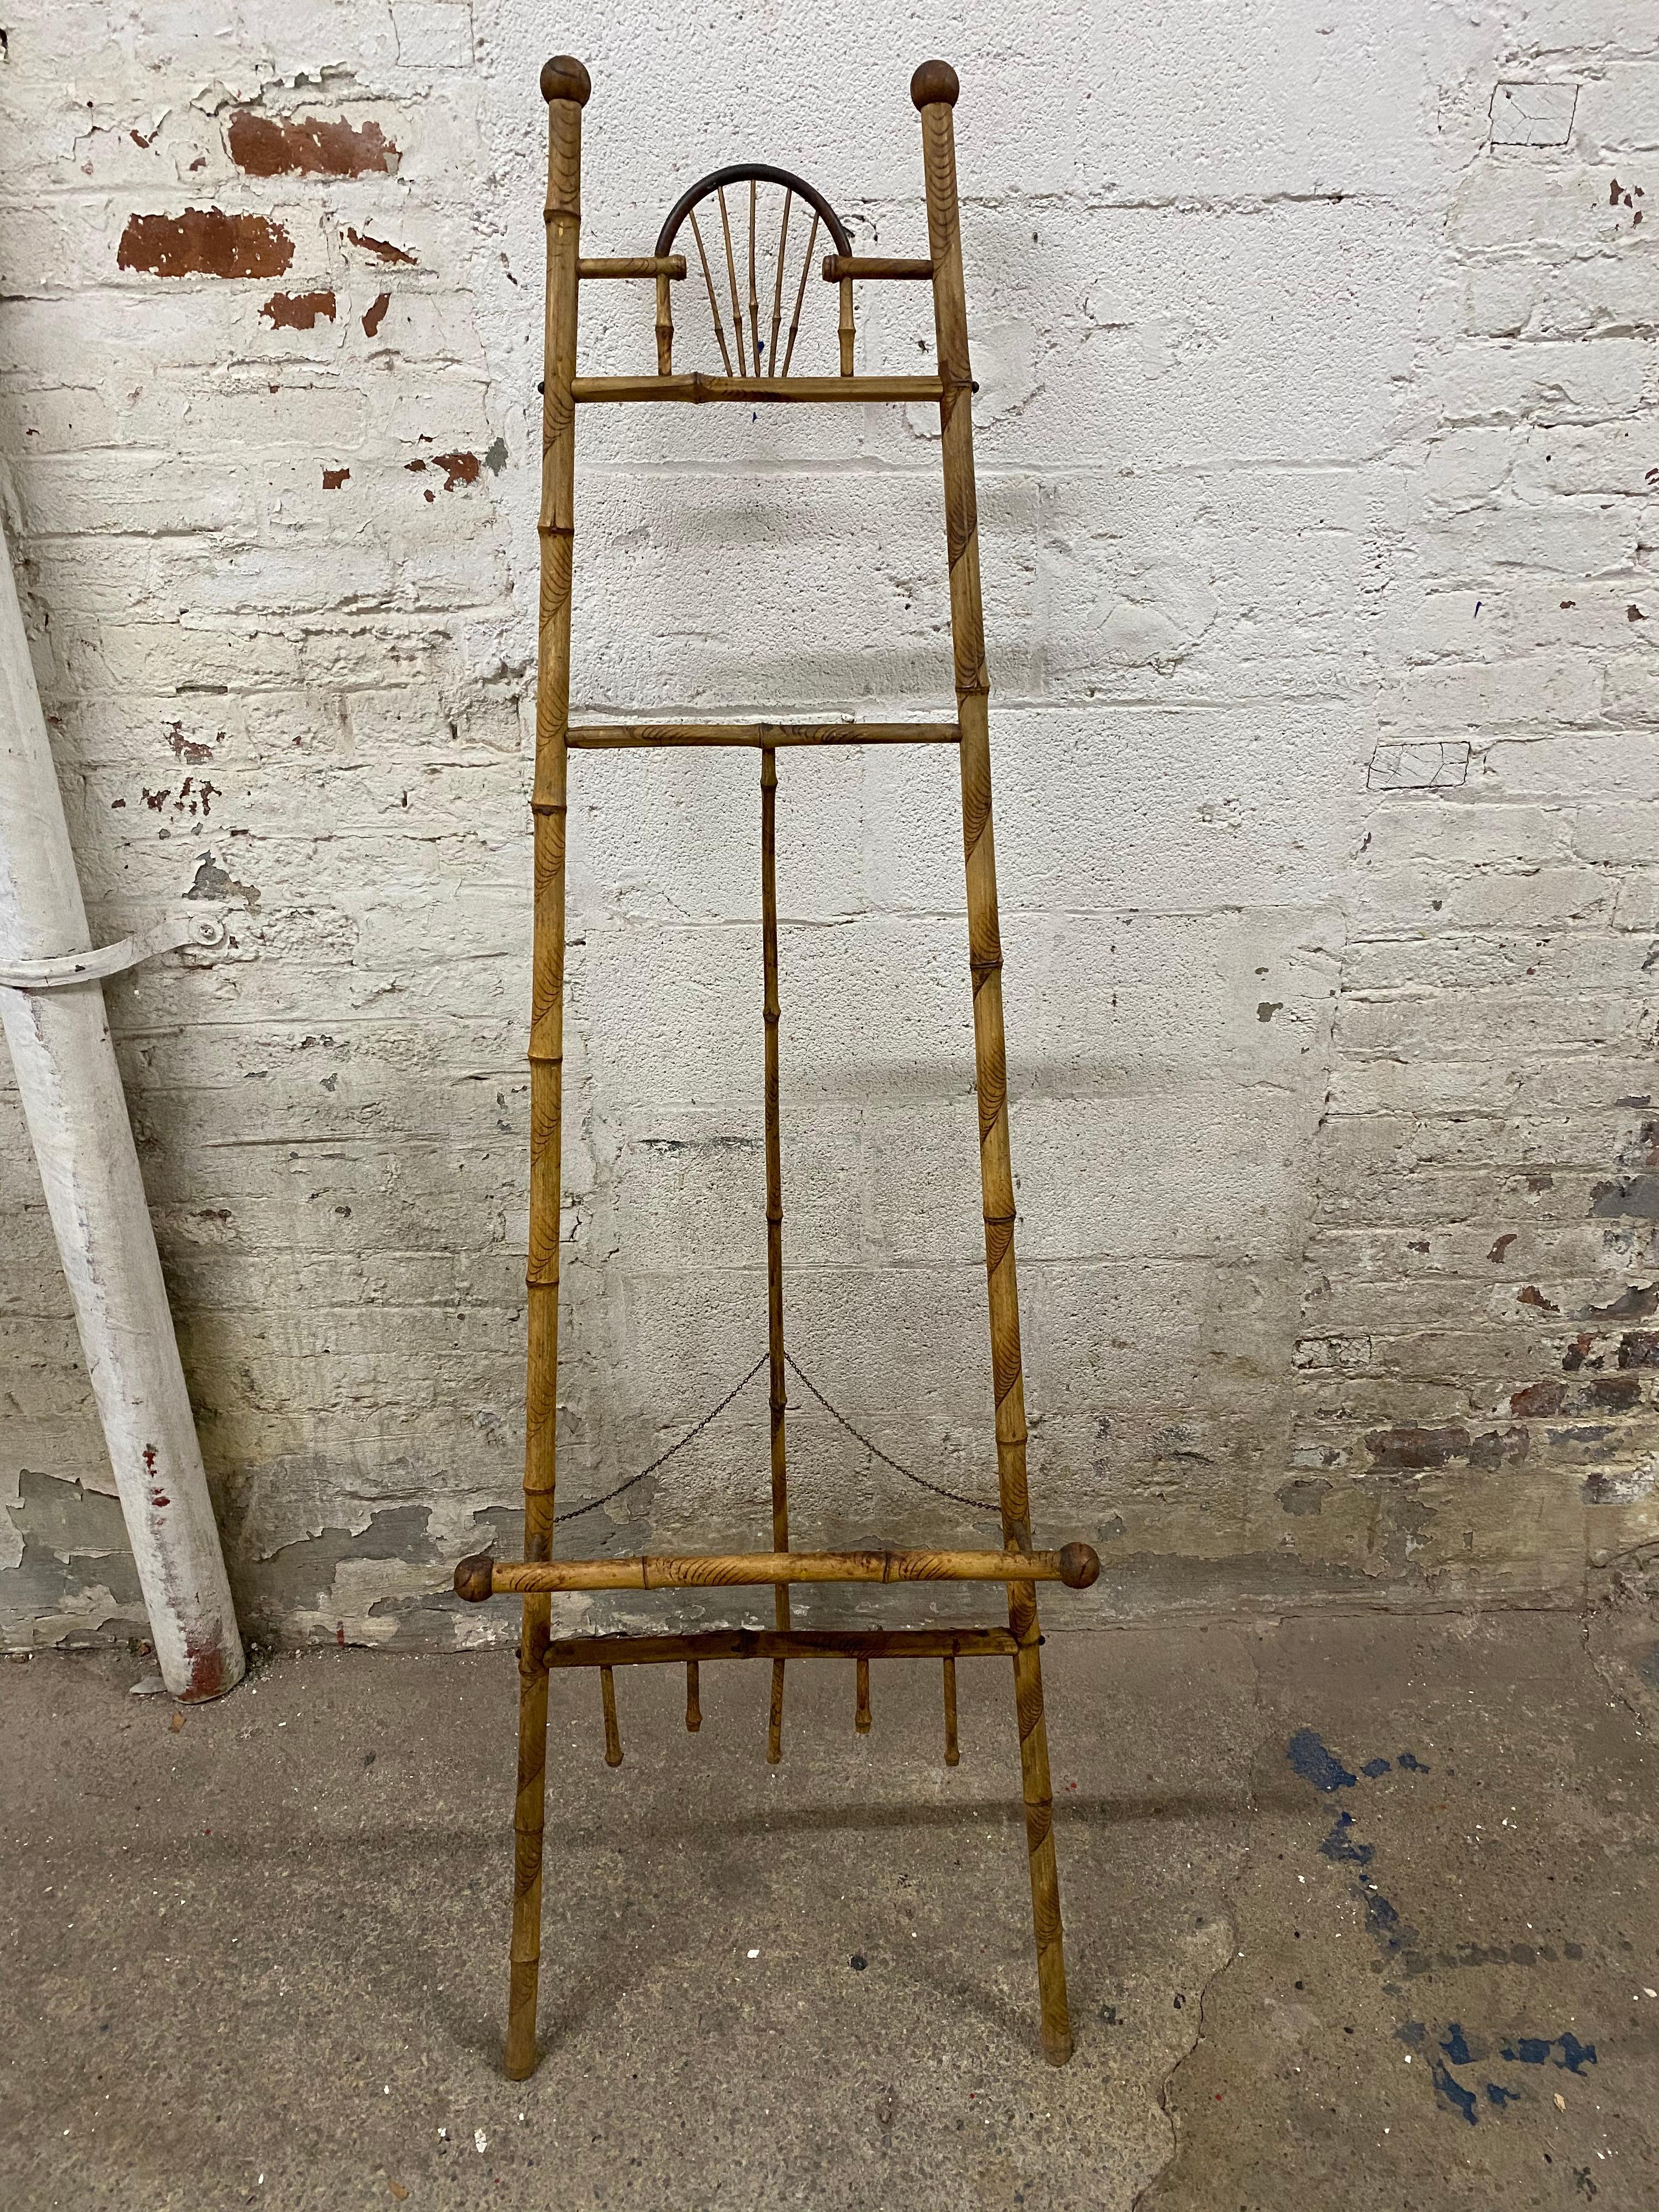 Victorian era bamboo easel. Delicate and refined with ball and stick motif. Structurally sound; it can hold a rather large painting, print, or mirror. Good overall condition.

Approximately 20